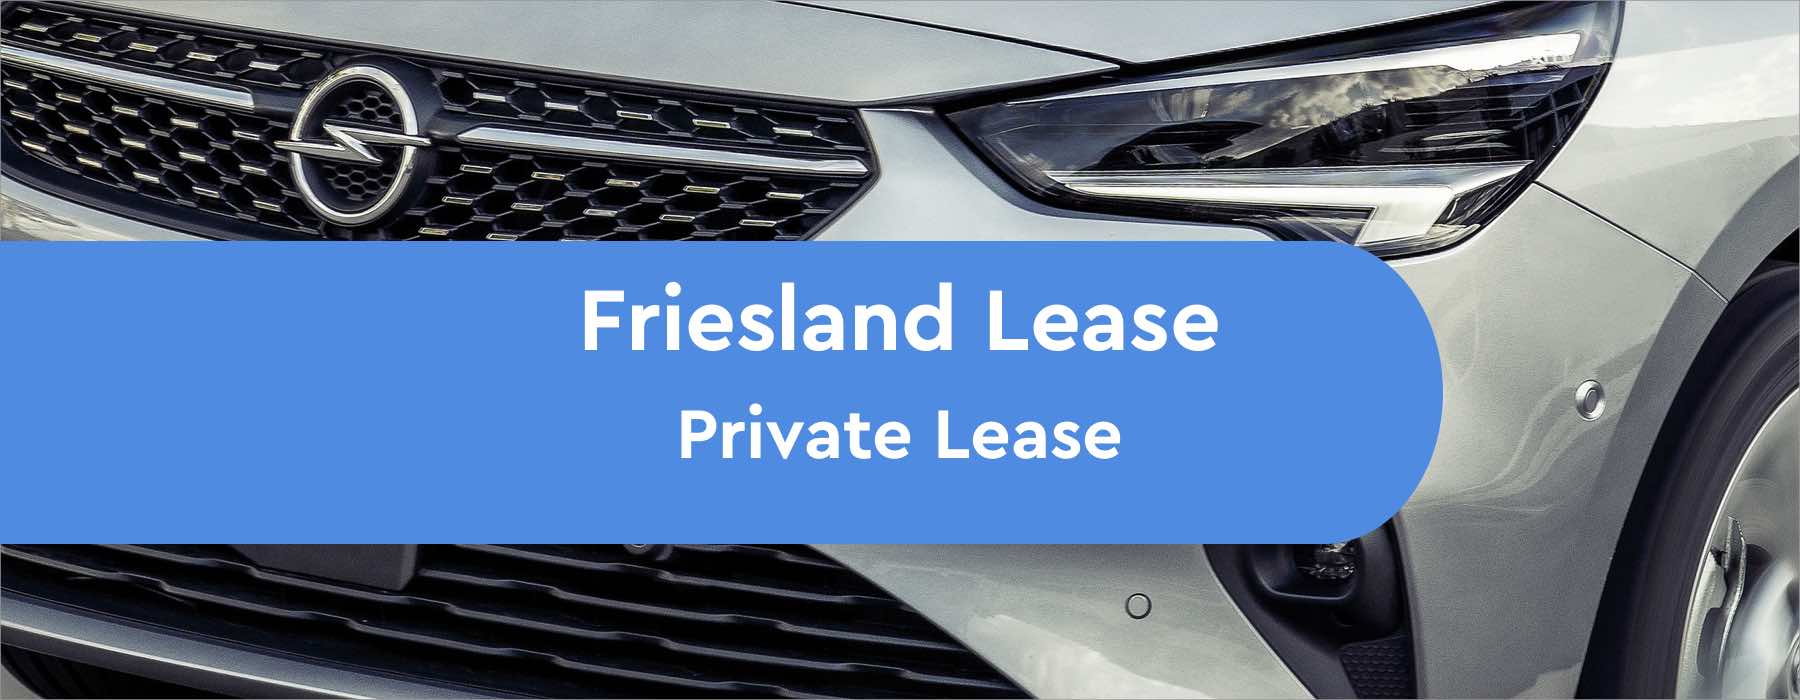 friesland lease Private Lease